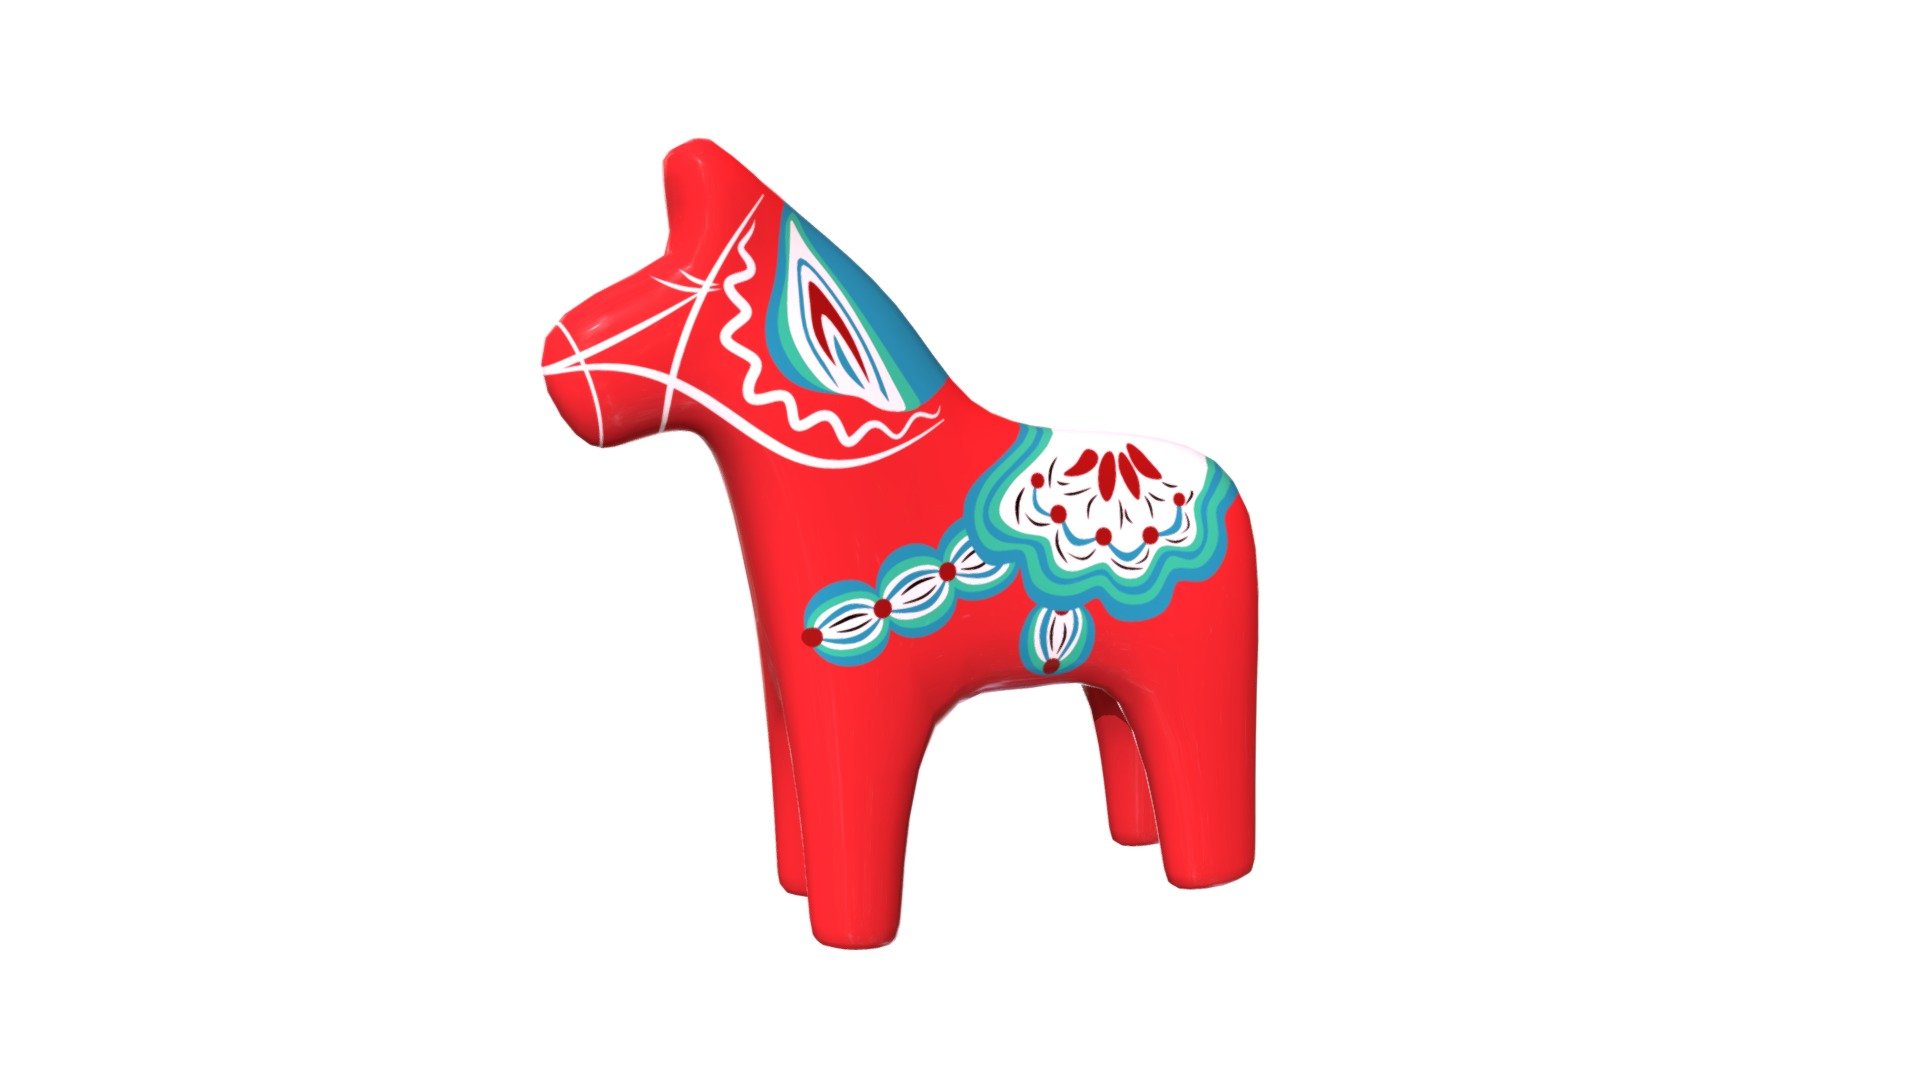 Sketchfab 3December - Day 4 - WOODEN

Small wooden horse that you can put on your window and stuff like that. Dala horses are made in Dalarna 3d model